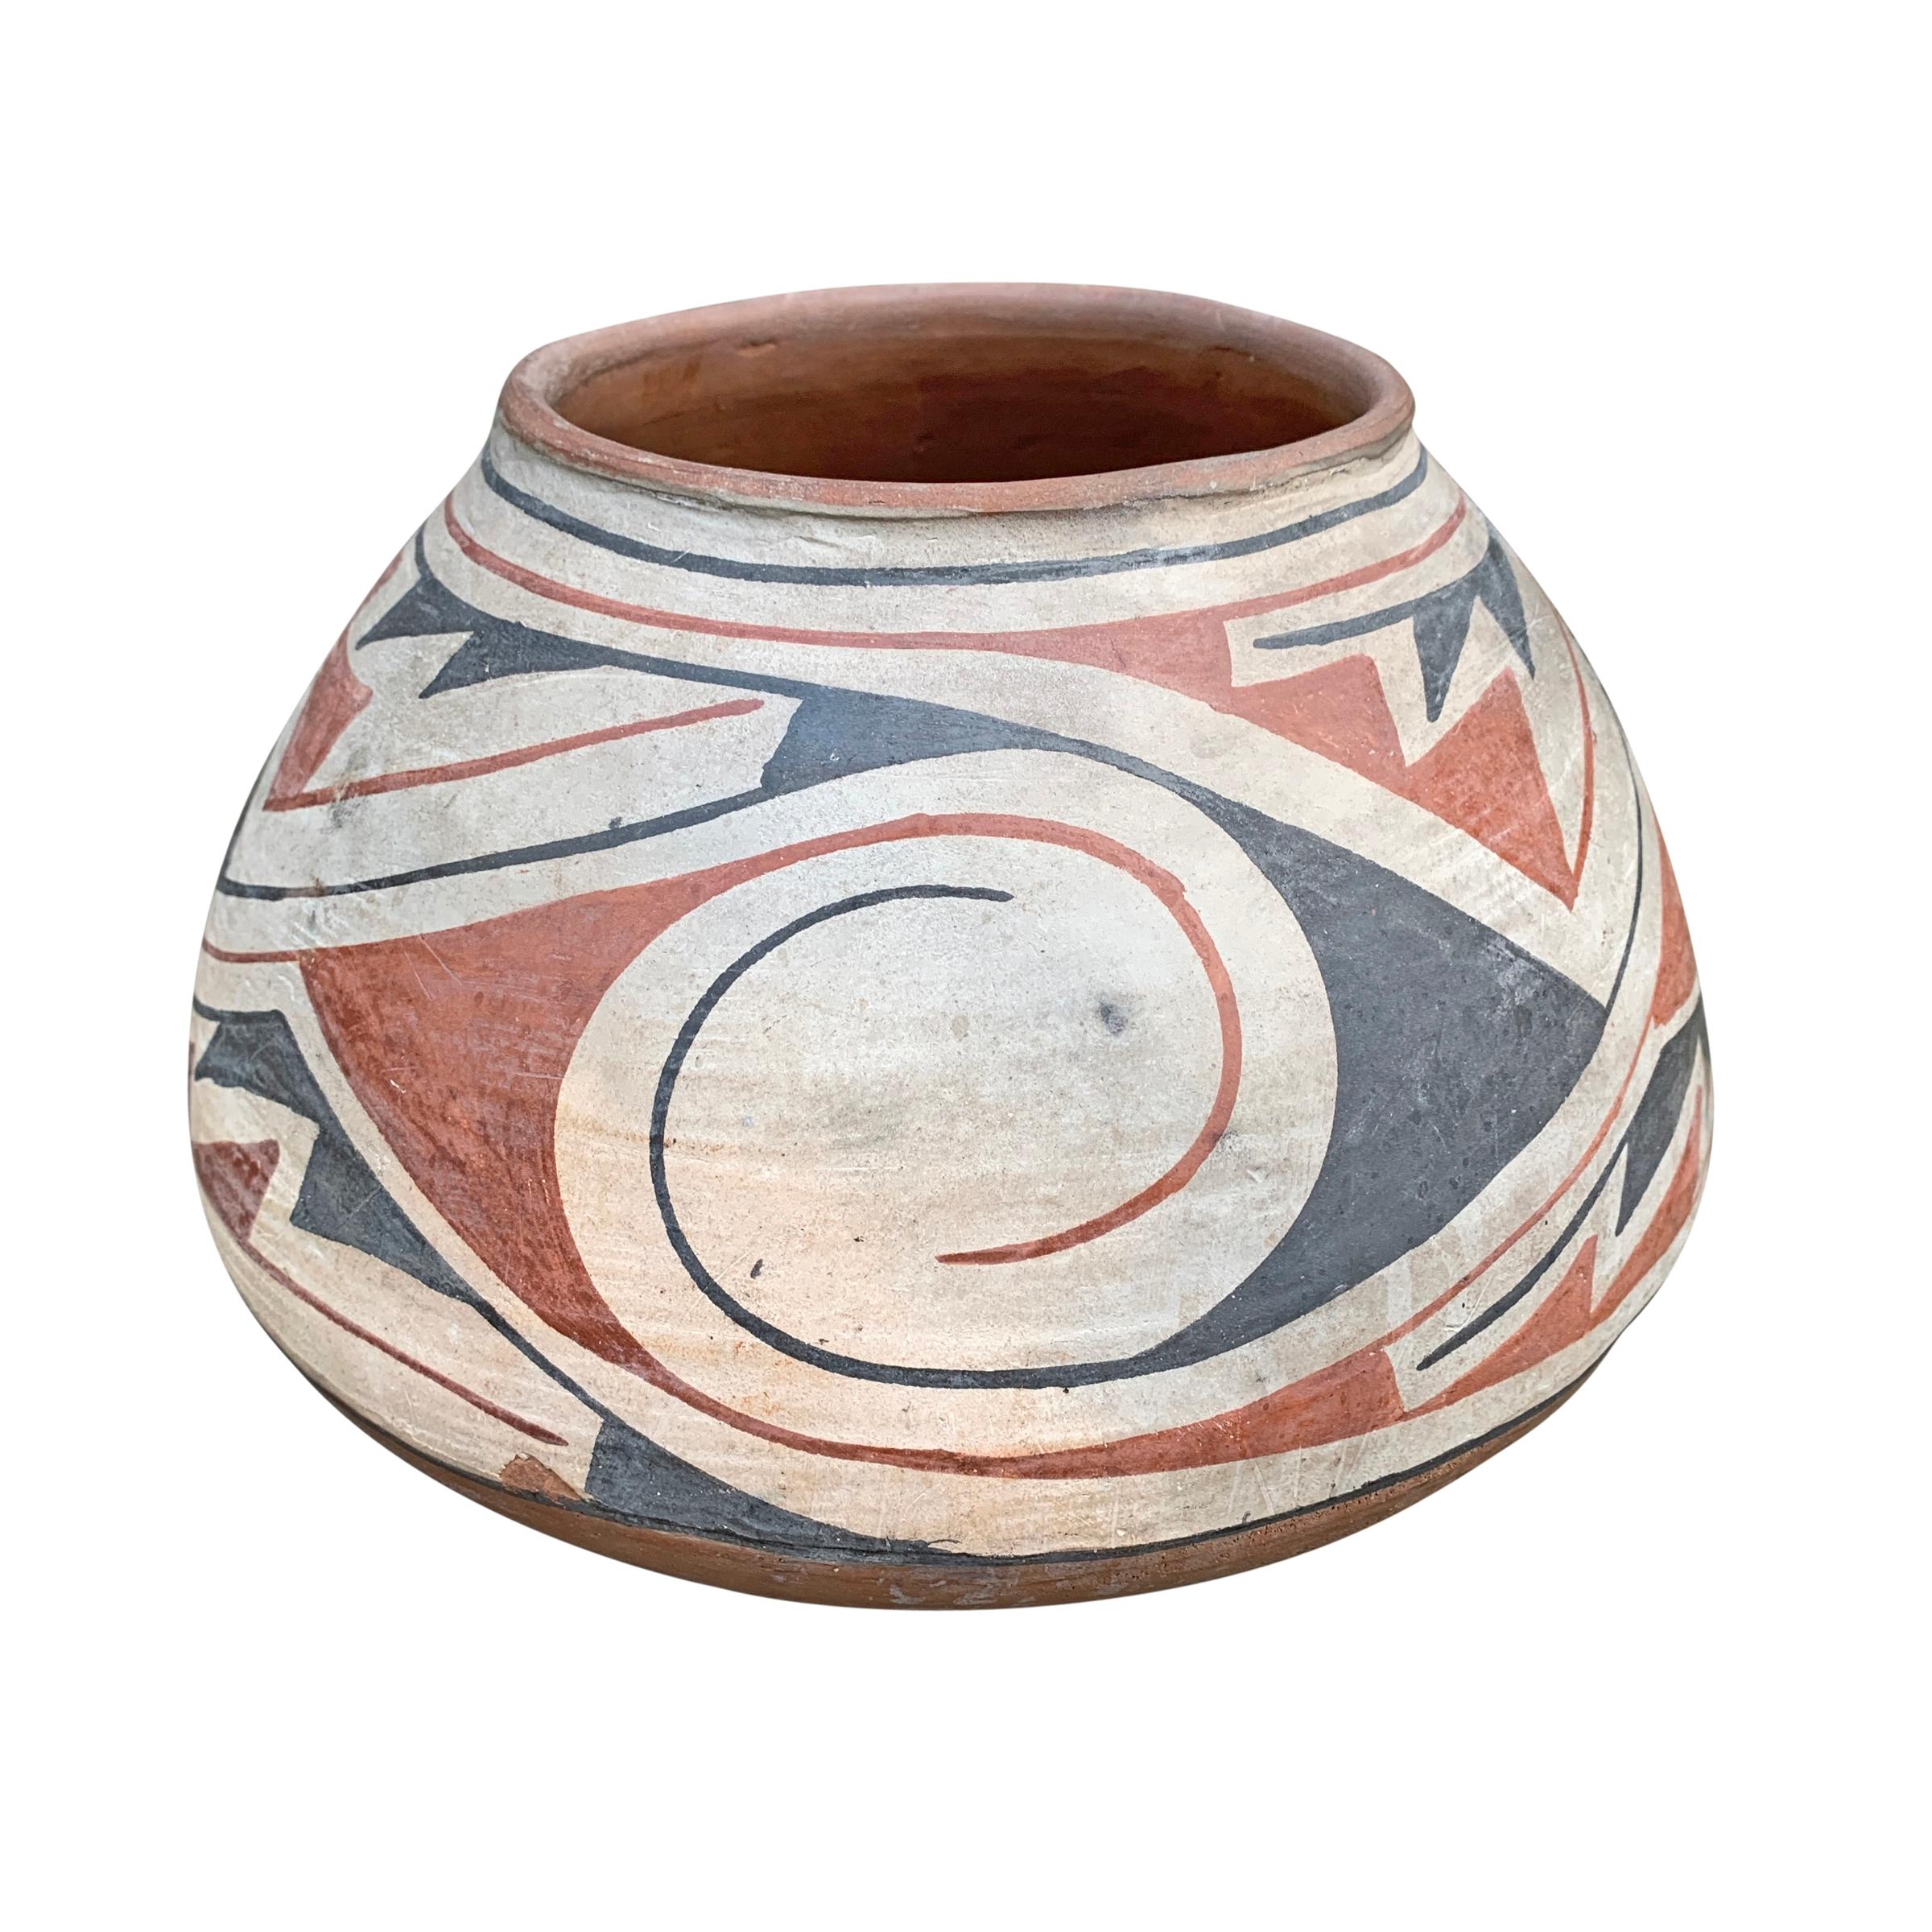 A striking vintage Casa Grandes pottery vase with a shallow bottom and a wide belly, and decorated with a red and black swirling wind pattern repeated three times around the pot. This pot dates to the 1940s when Prehistoric designs became popular.